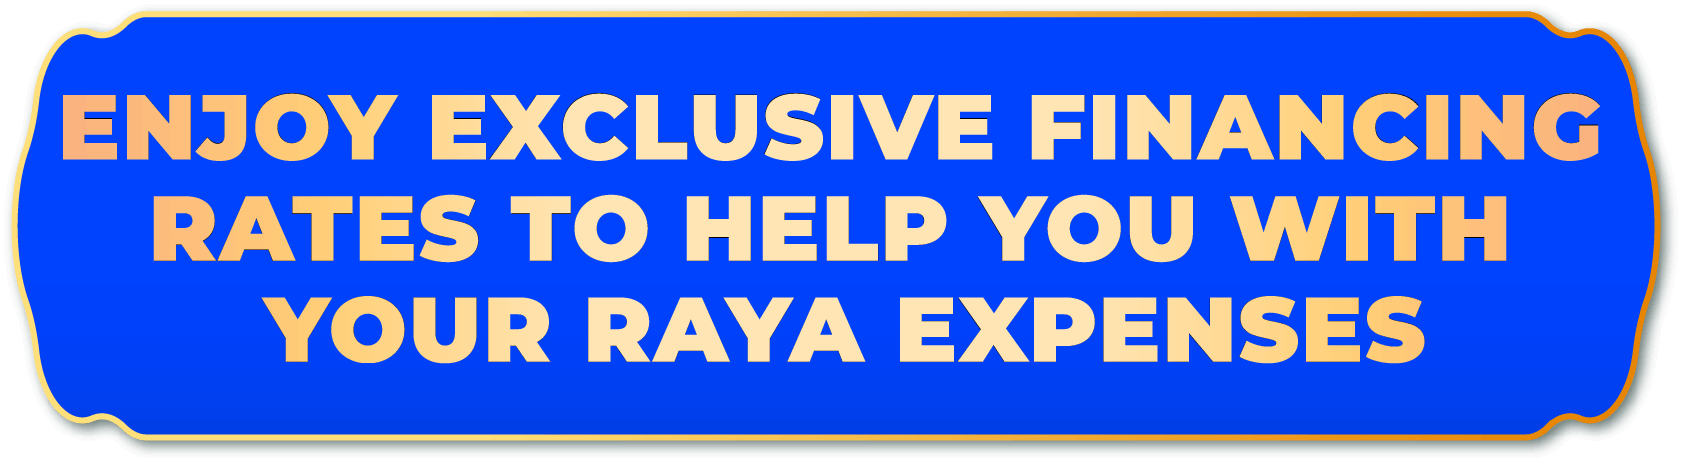 ENJOY EXCLUSIVE FINANCING RATES TO HELP YOU WITH YOUR RAYA EXPENSES